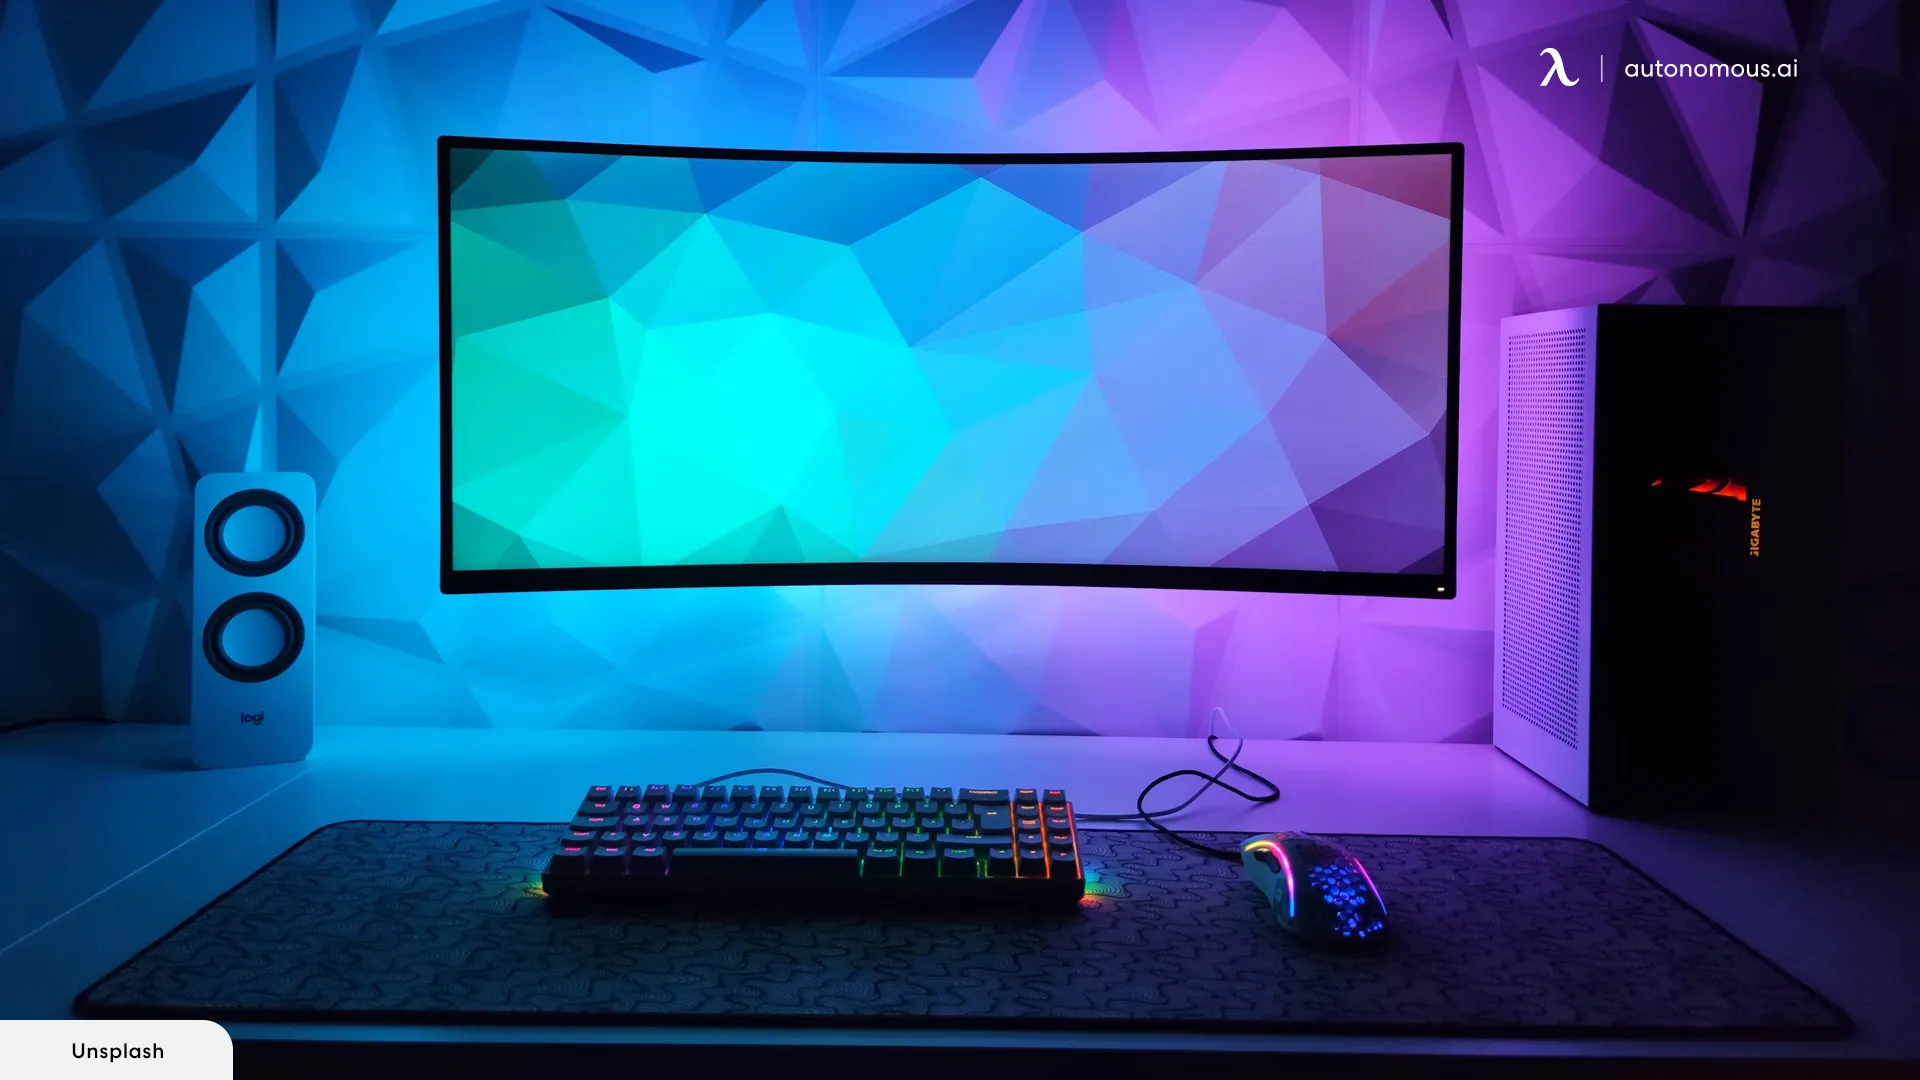 Do LED lights help with gaming?